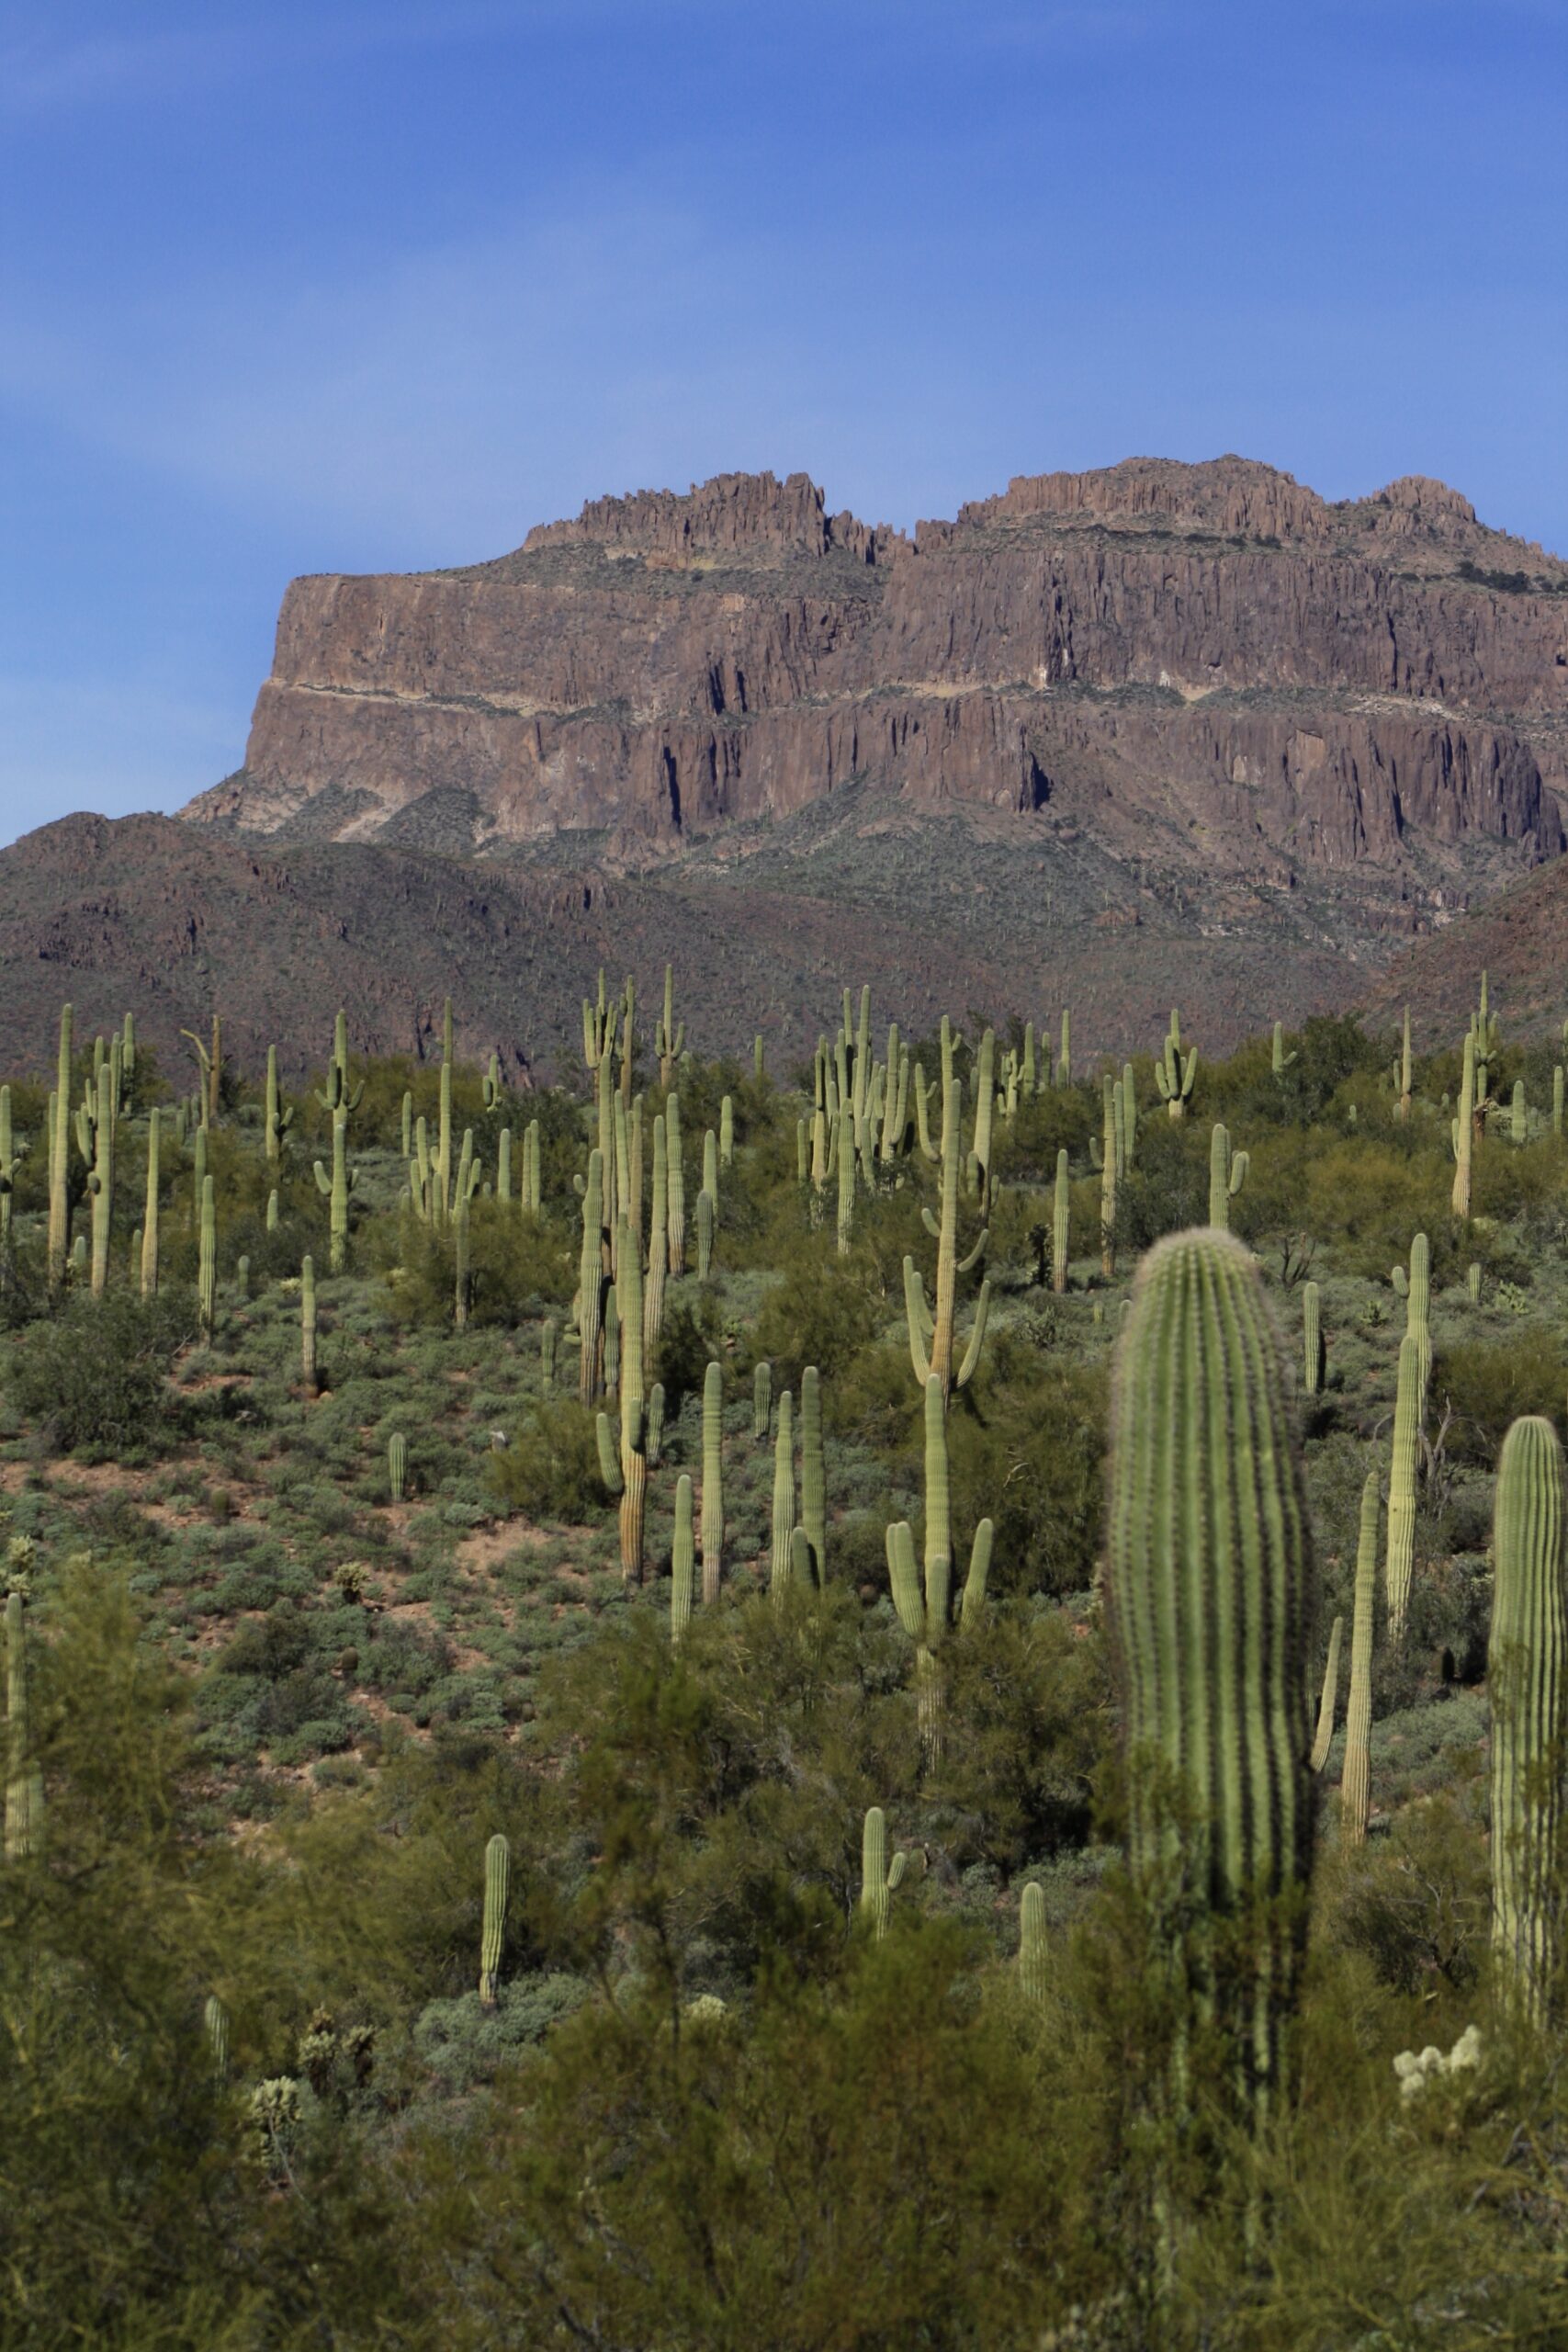 Hikes in the Superstition Mountains (& a FREE PRODUCT!)